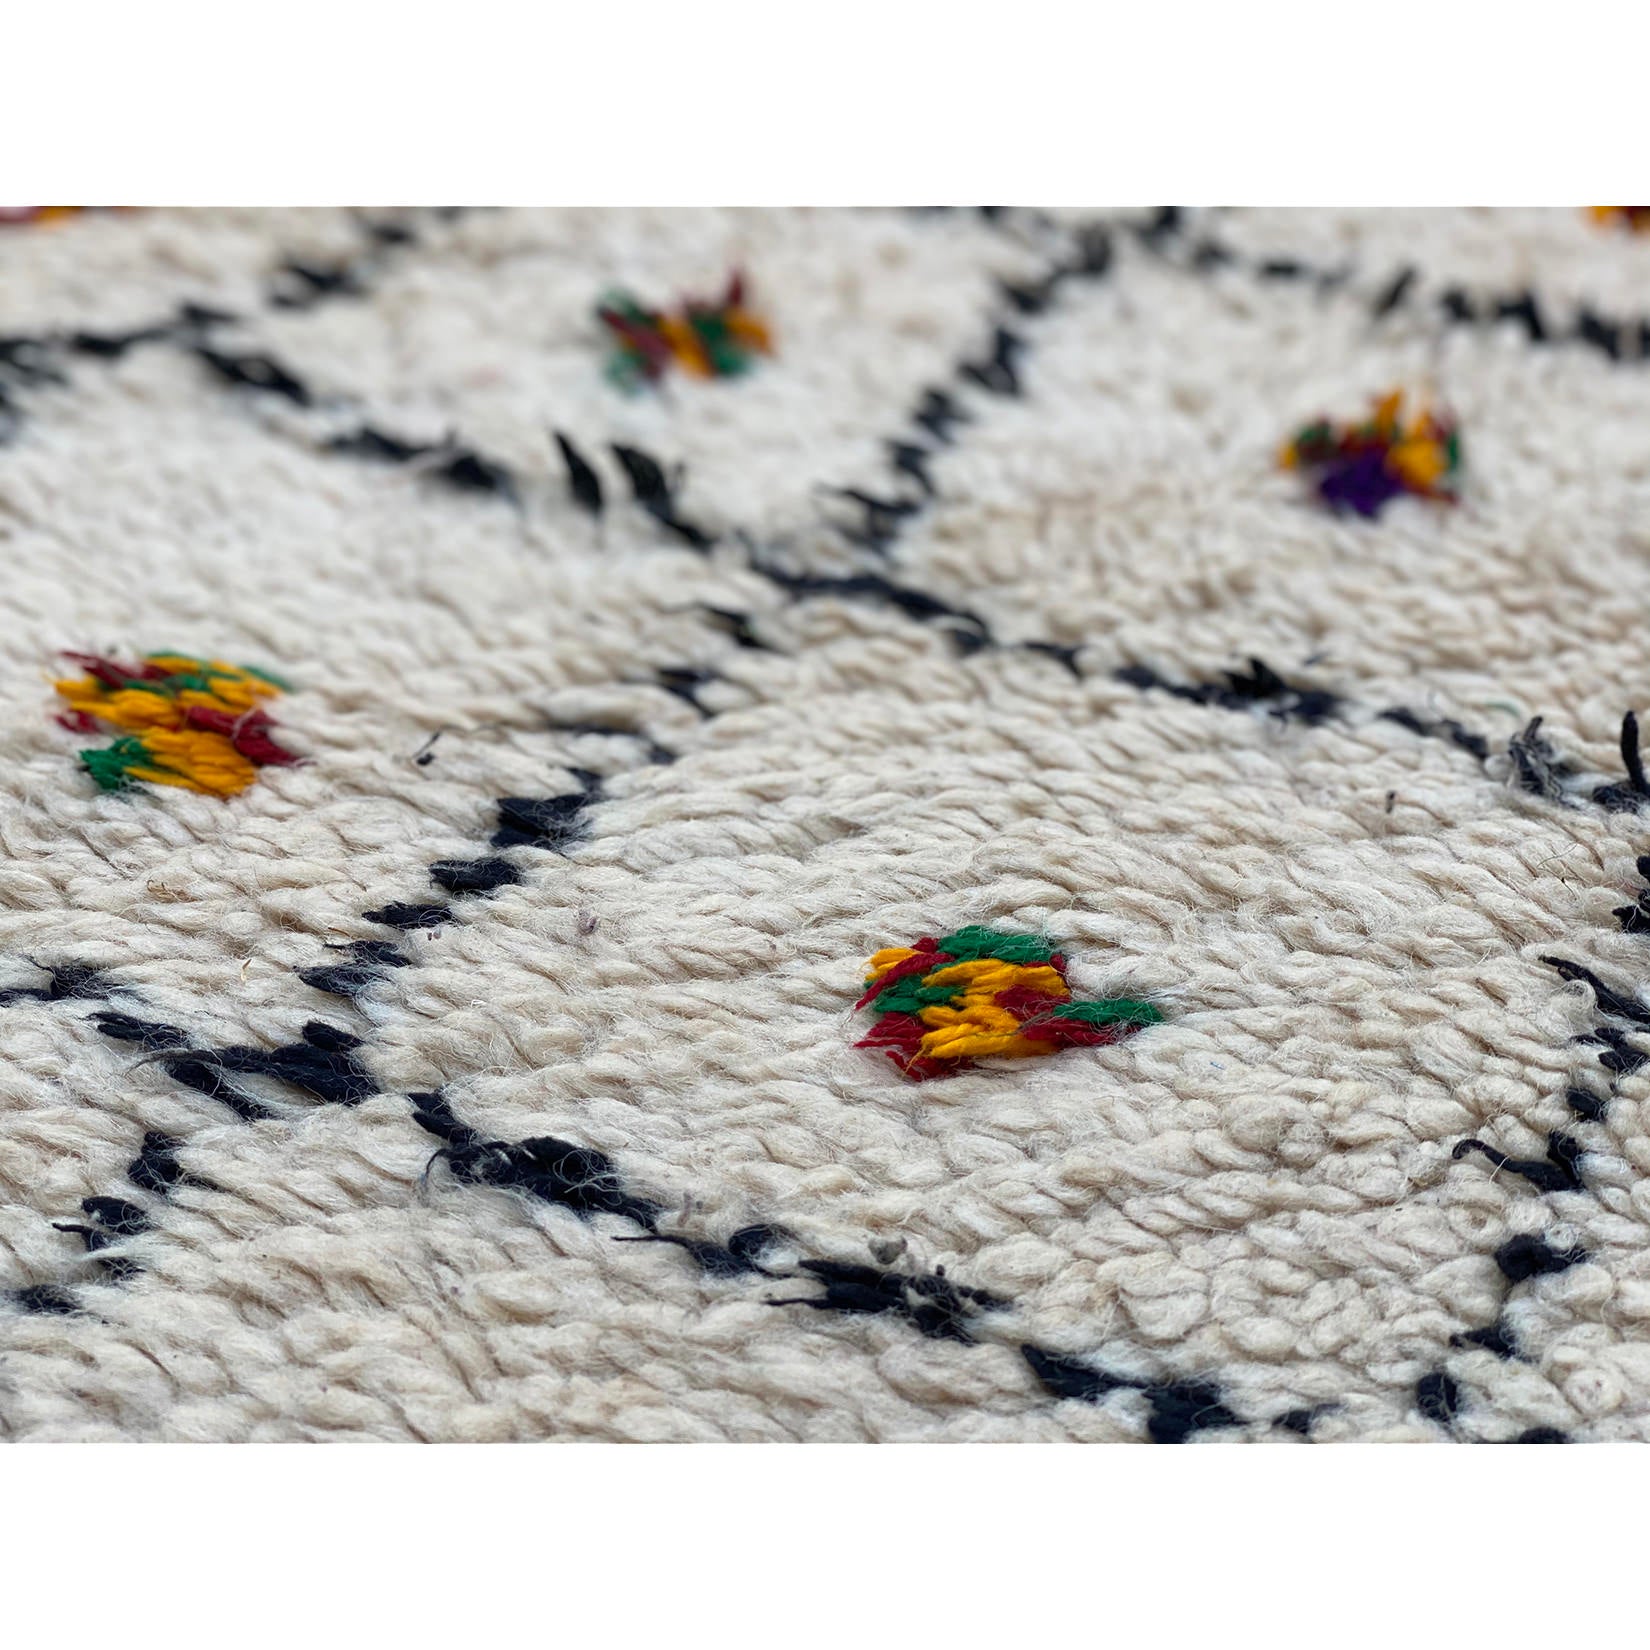 Black and white Moroccan diamond rug with colorful cotton accents - Kantara | Moroccan Rugs